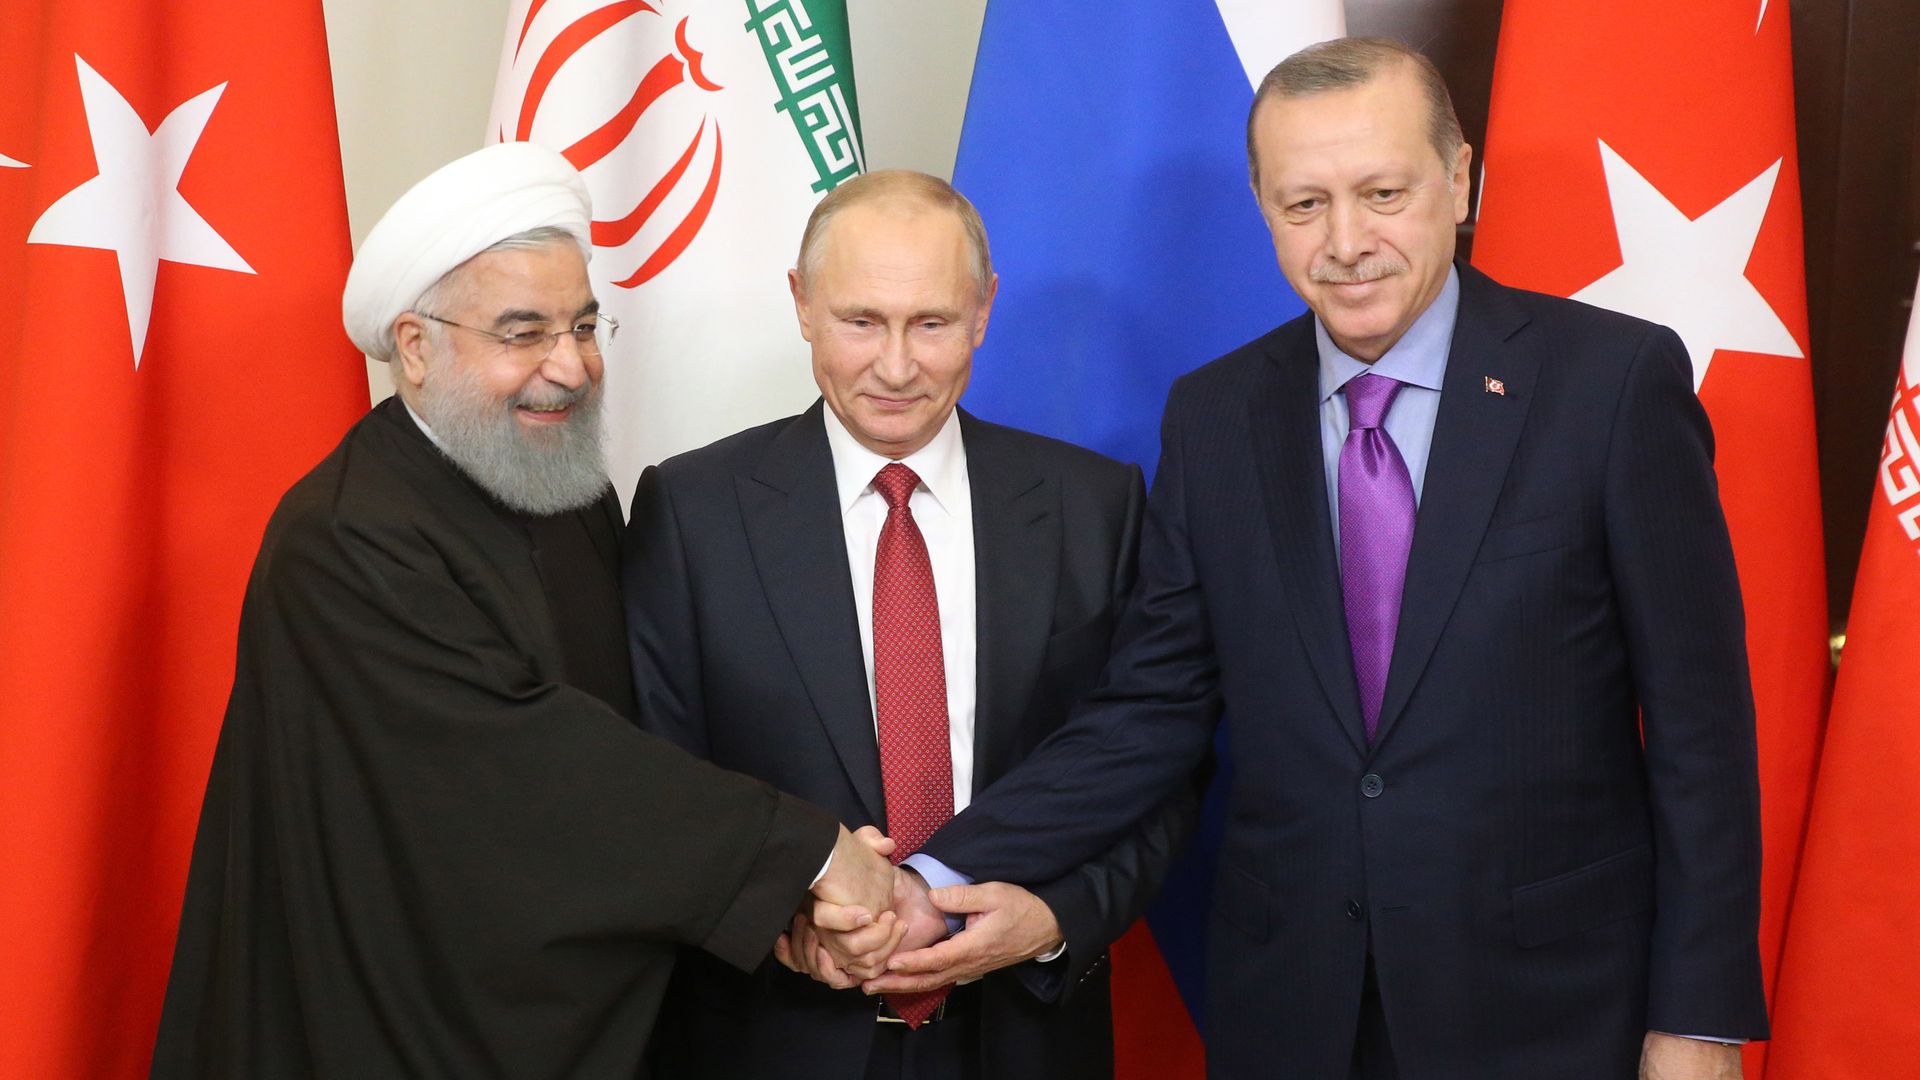 Russian President Vladimir Putin pose for a photo with Turkish President Recep Tayyip Erdogan and Iranian President Hassan Rouhani prior to their talks at Black Sea resort state residence